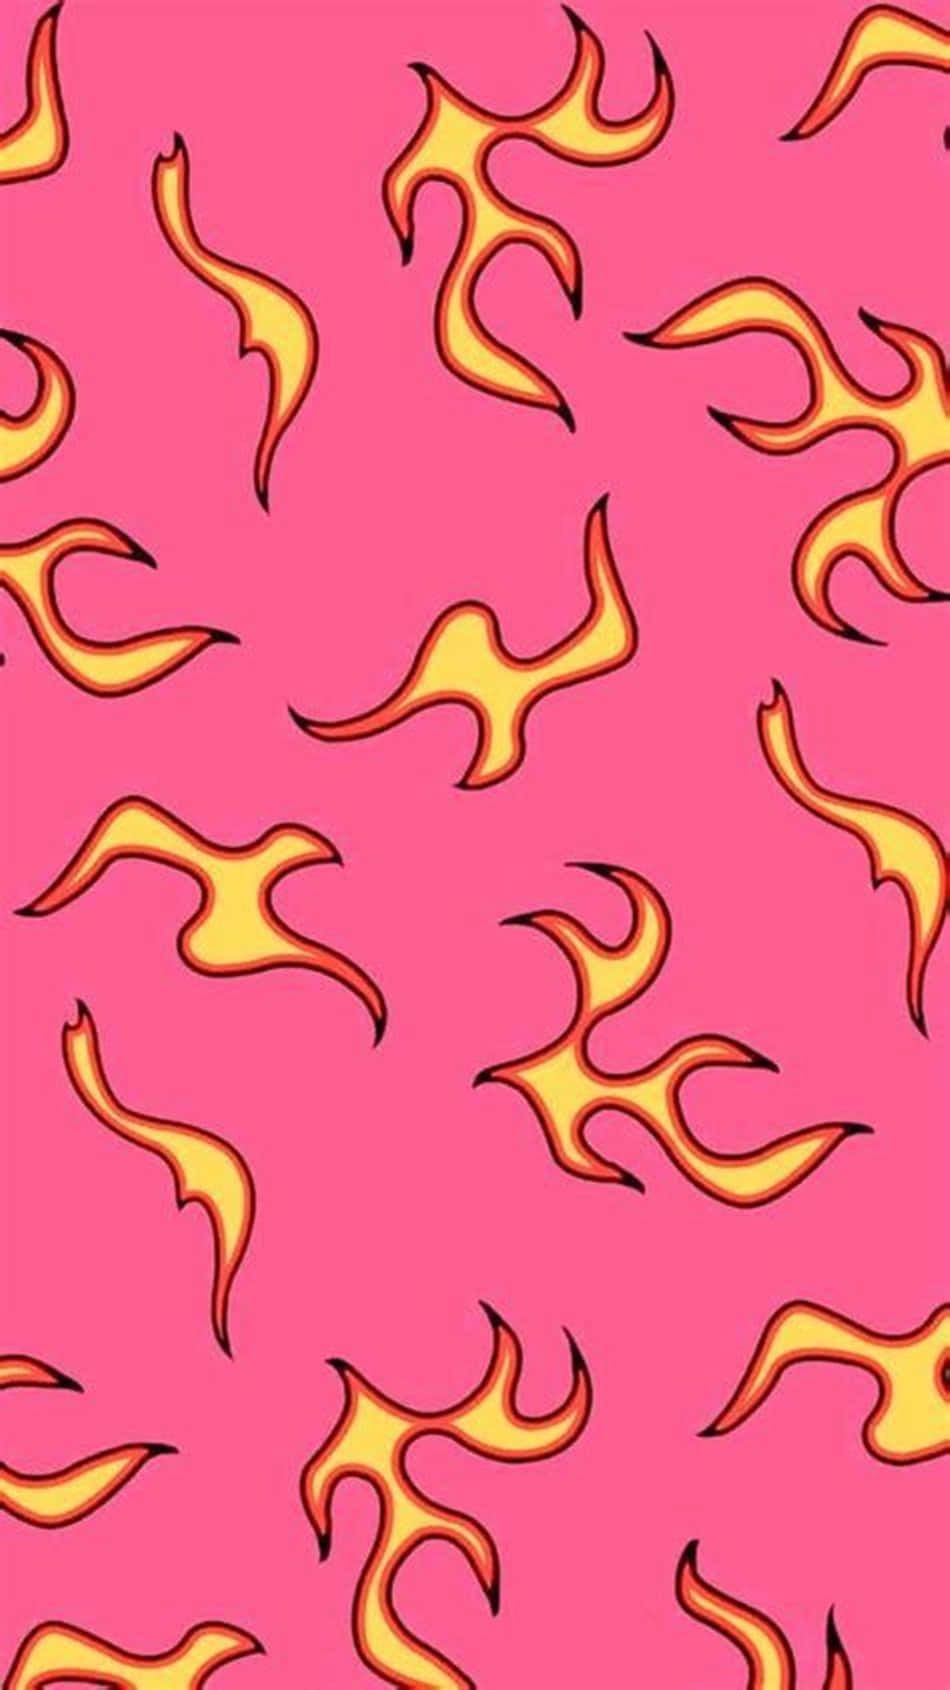 IPhone wallpaper flame pink aesthetic background pattern - Flames